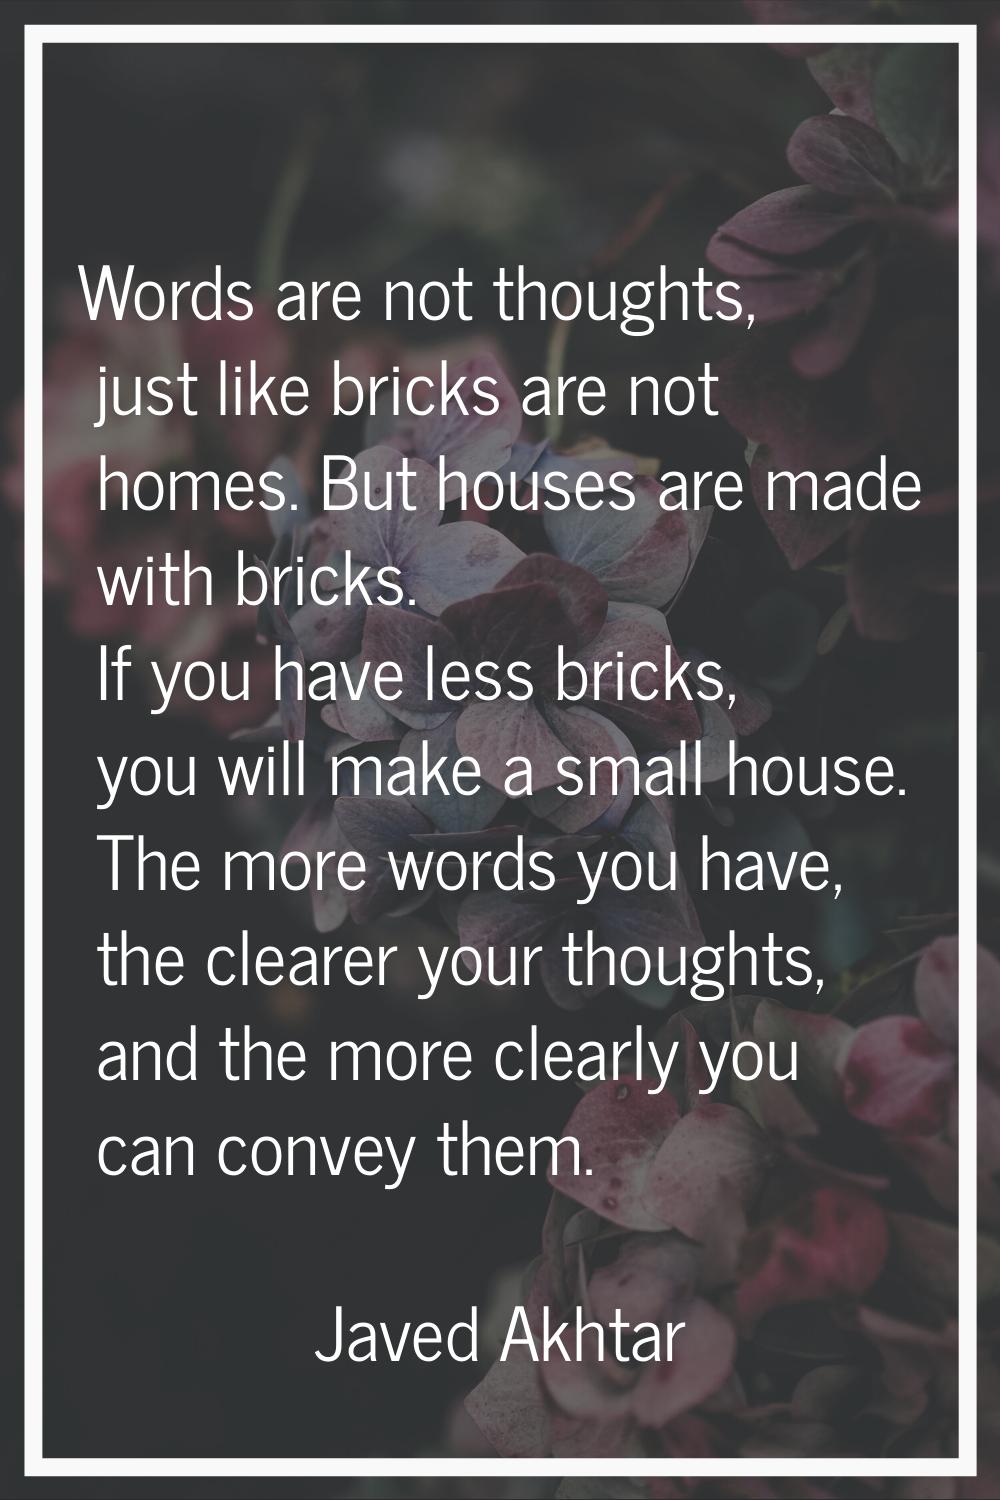 Words are not thoughts, just like bricks are not homes. But houses are made with bricks. If you hav